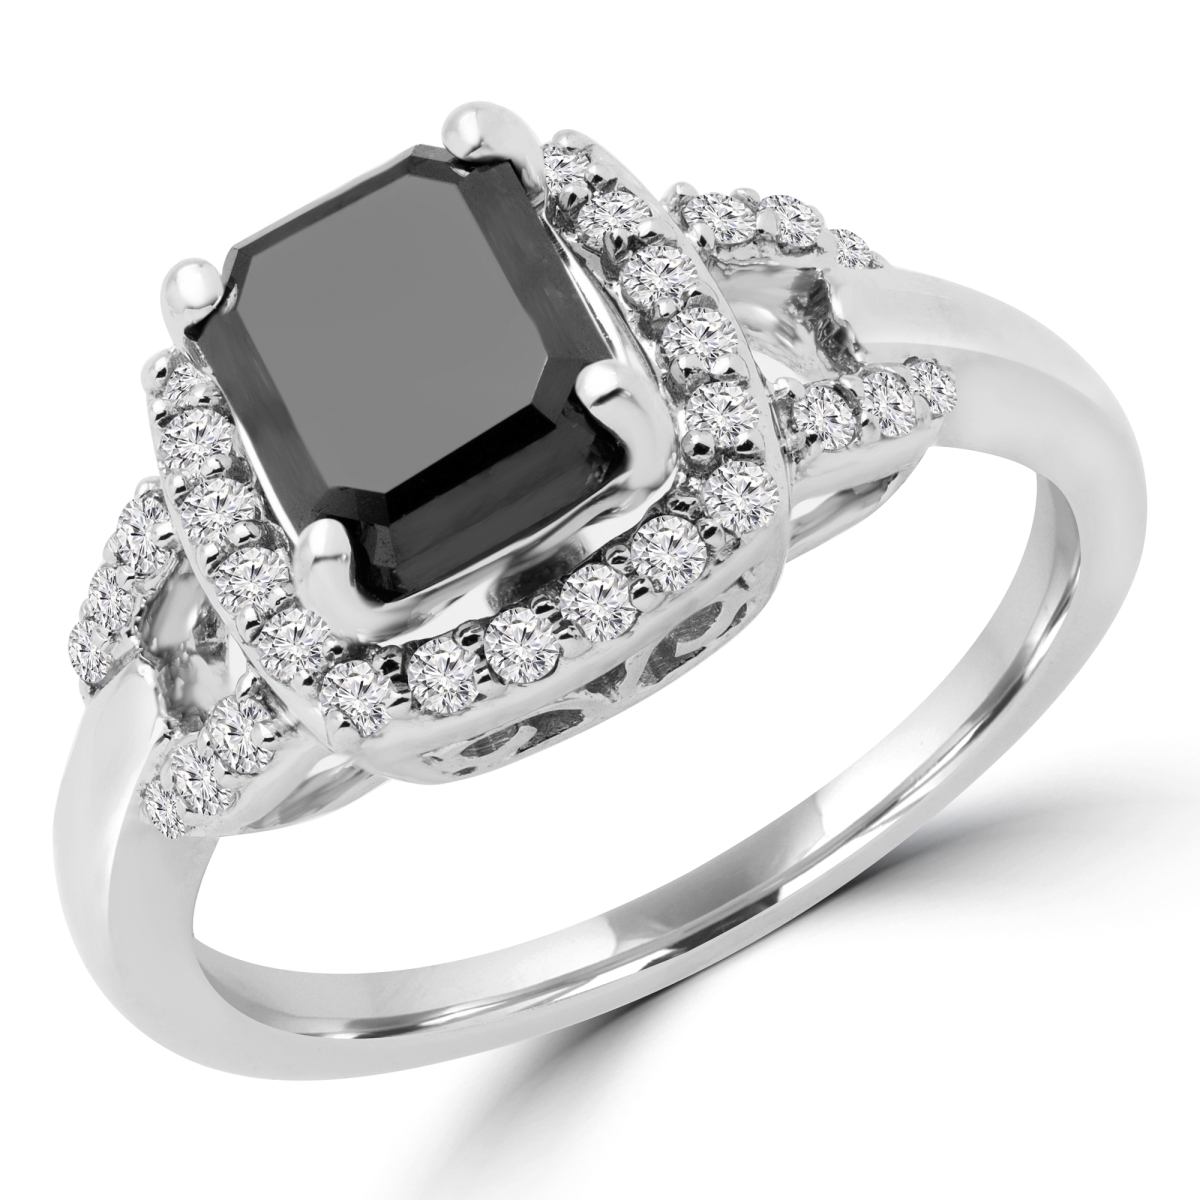 Picture of Majesty Diamonds MD180145-P 2.05 CTW Round Black Diamond Halo Engagement Ring in 14K White Gold